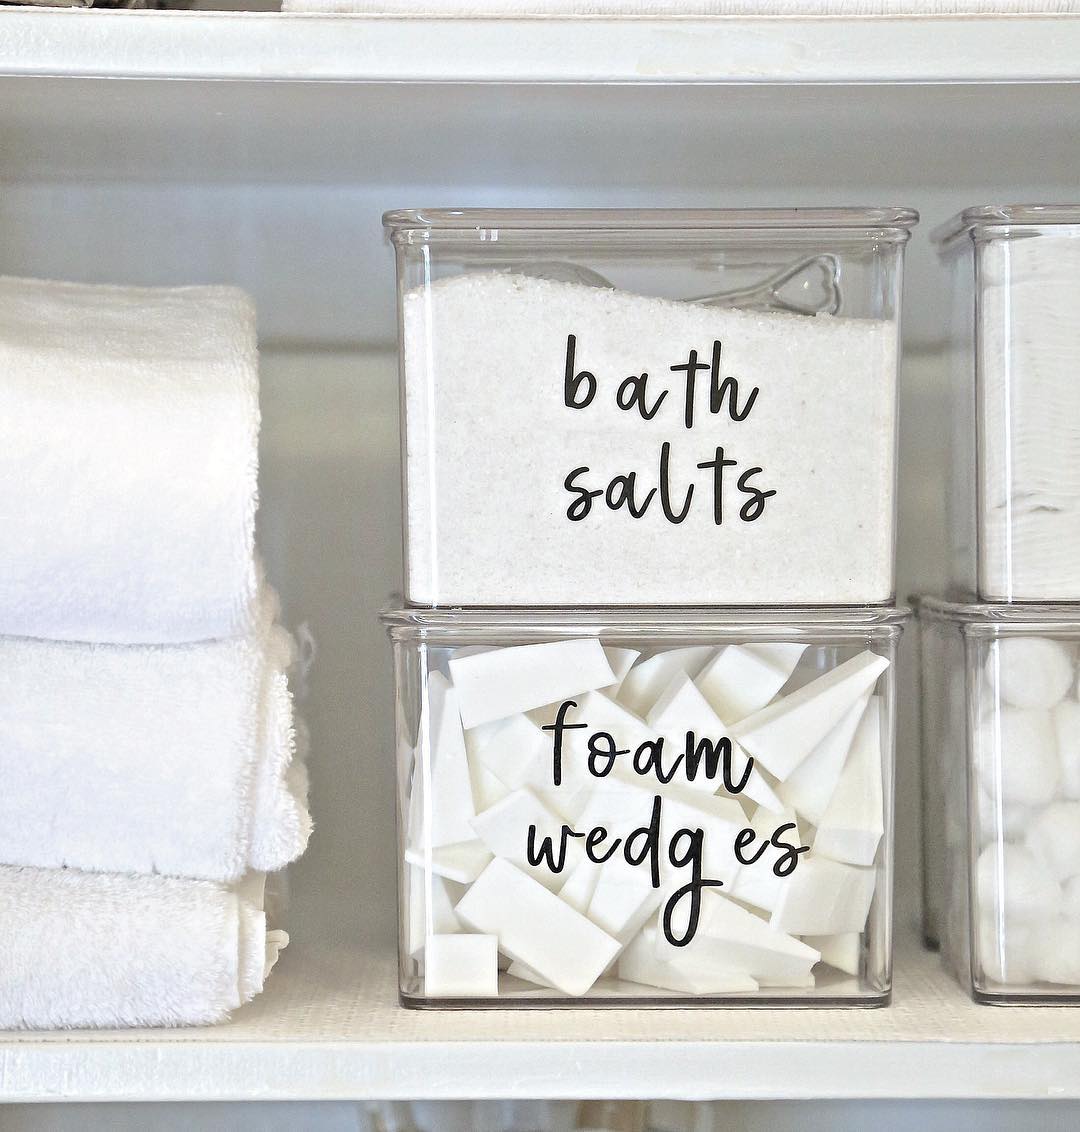 Labeled Containers for Bath Salts and Foam Wedges. Photo by Instagram user @thecreativity exchange